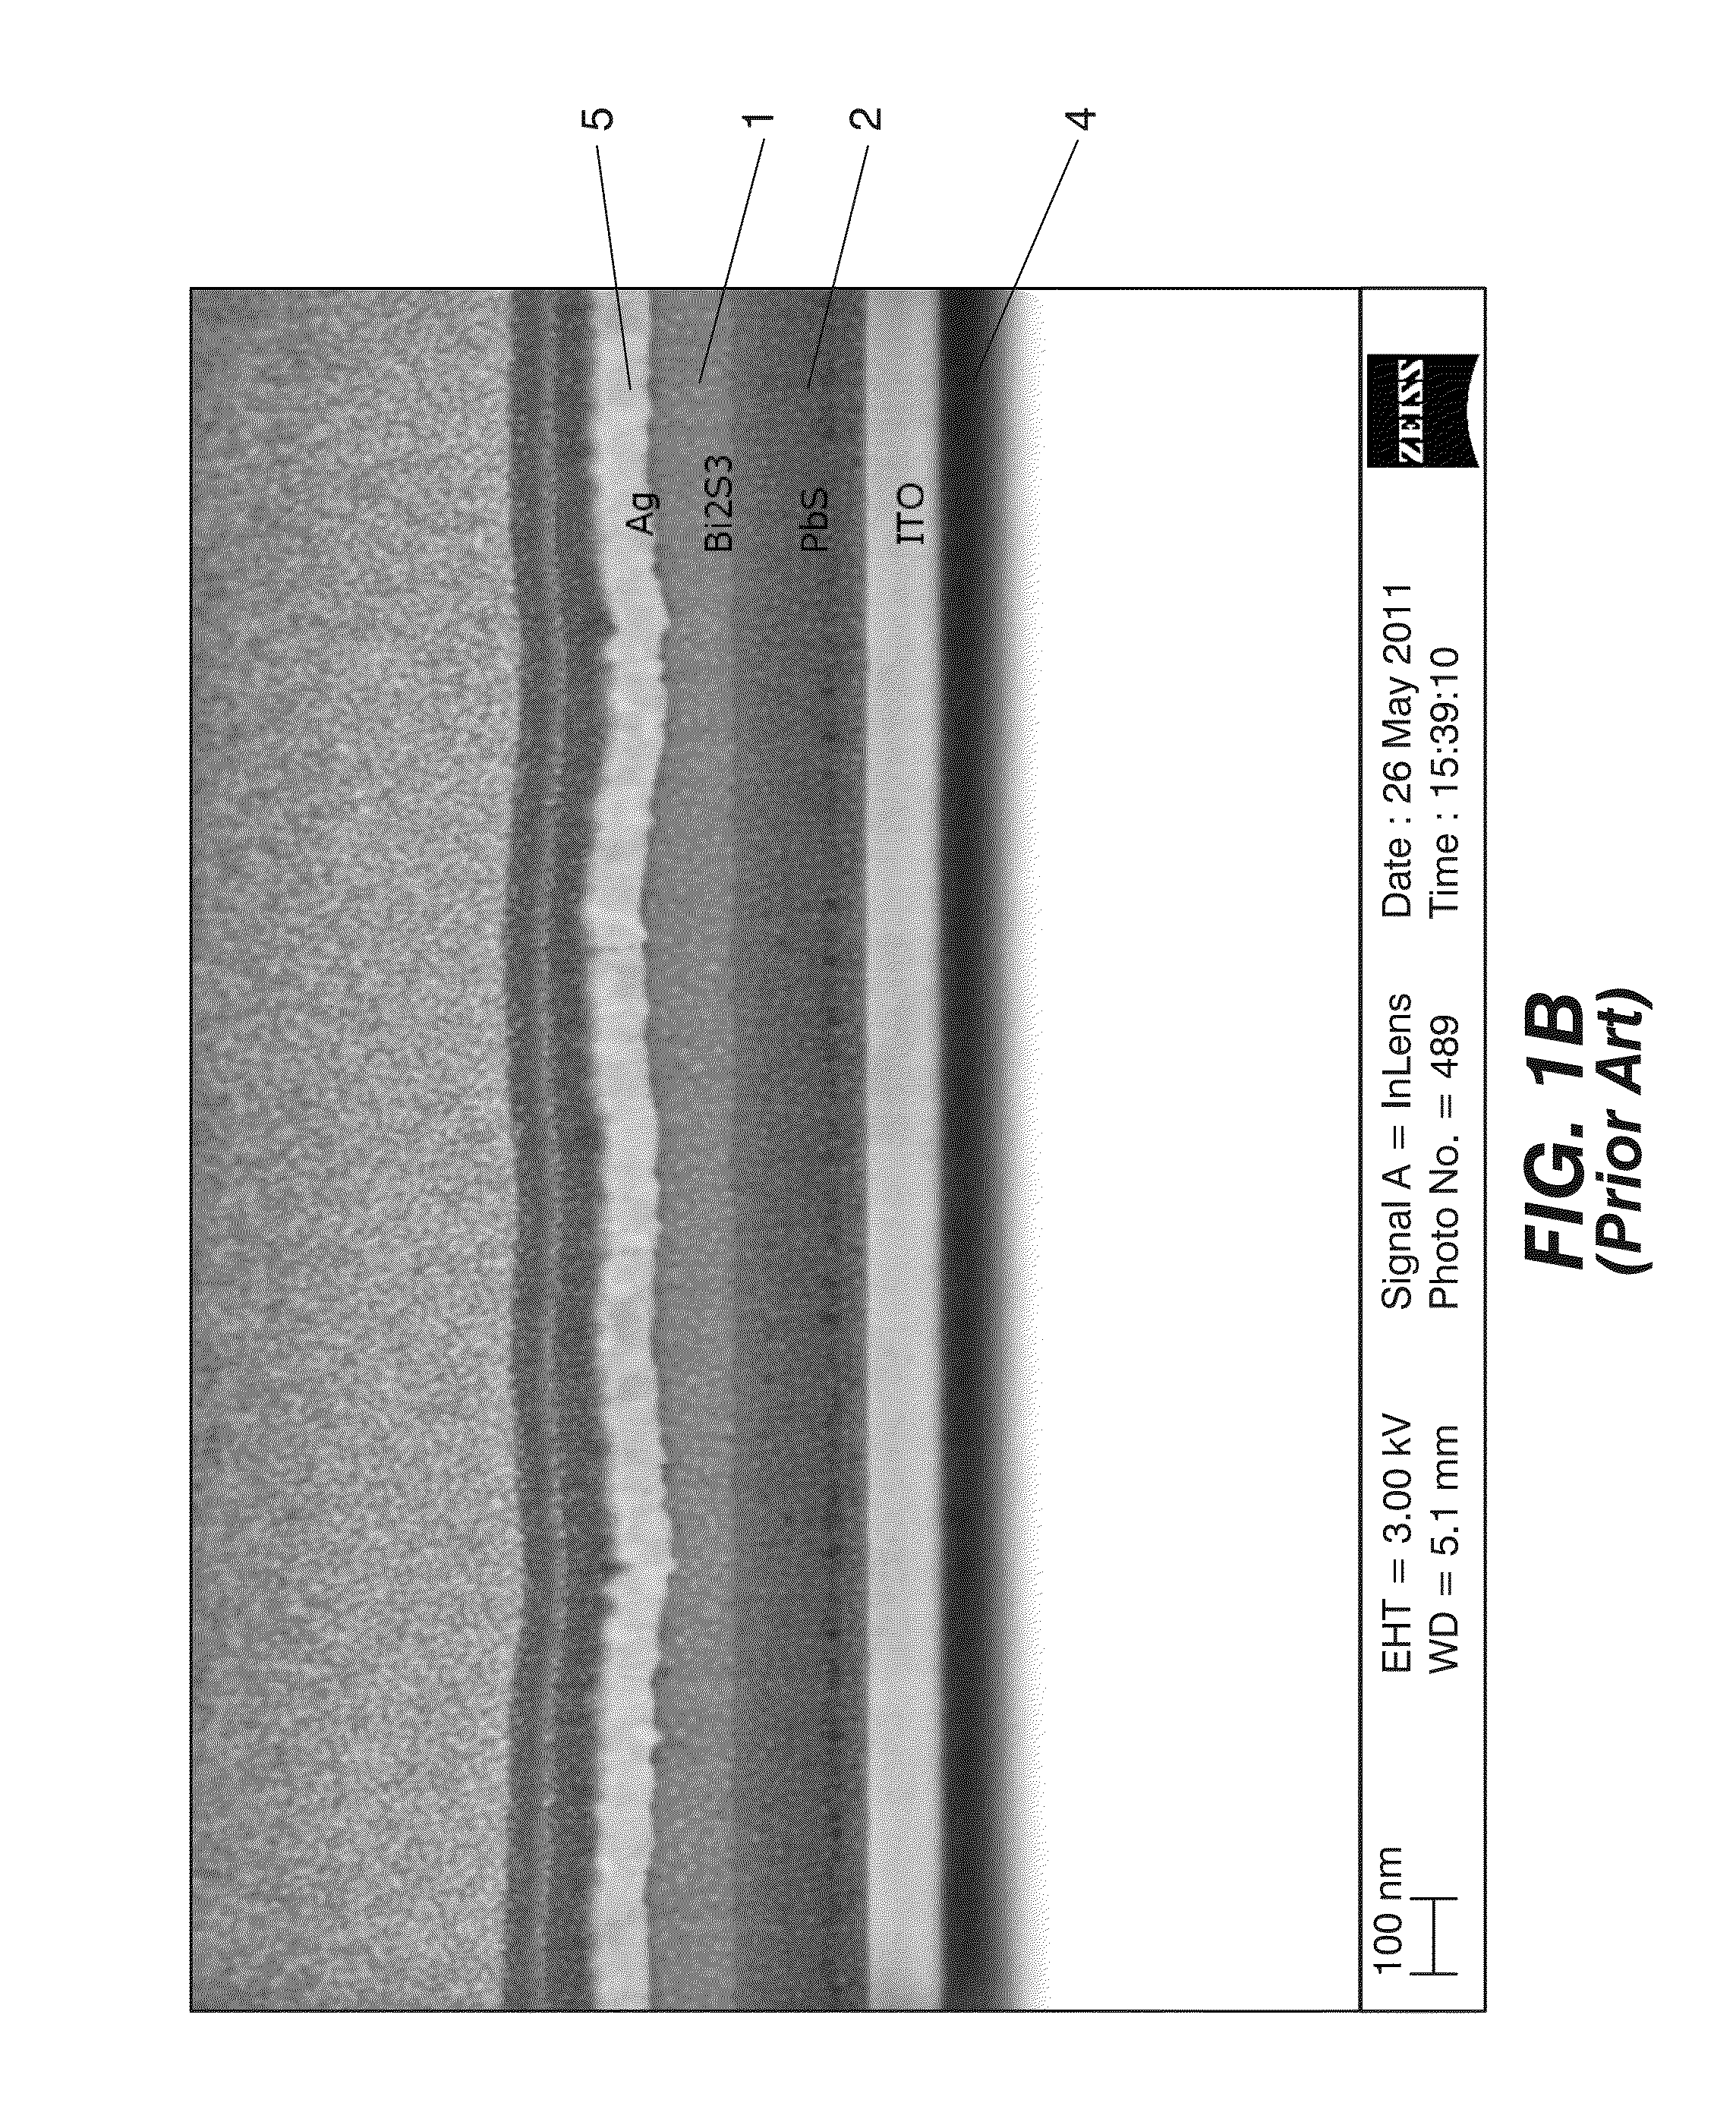 Photovoltaic nanocomposite comprising solution processed inorganic bulk nano-heterojunctions, solar cell and photodiode devices comprising the nanocomposite